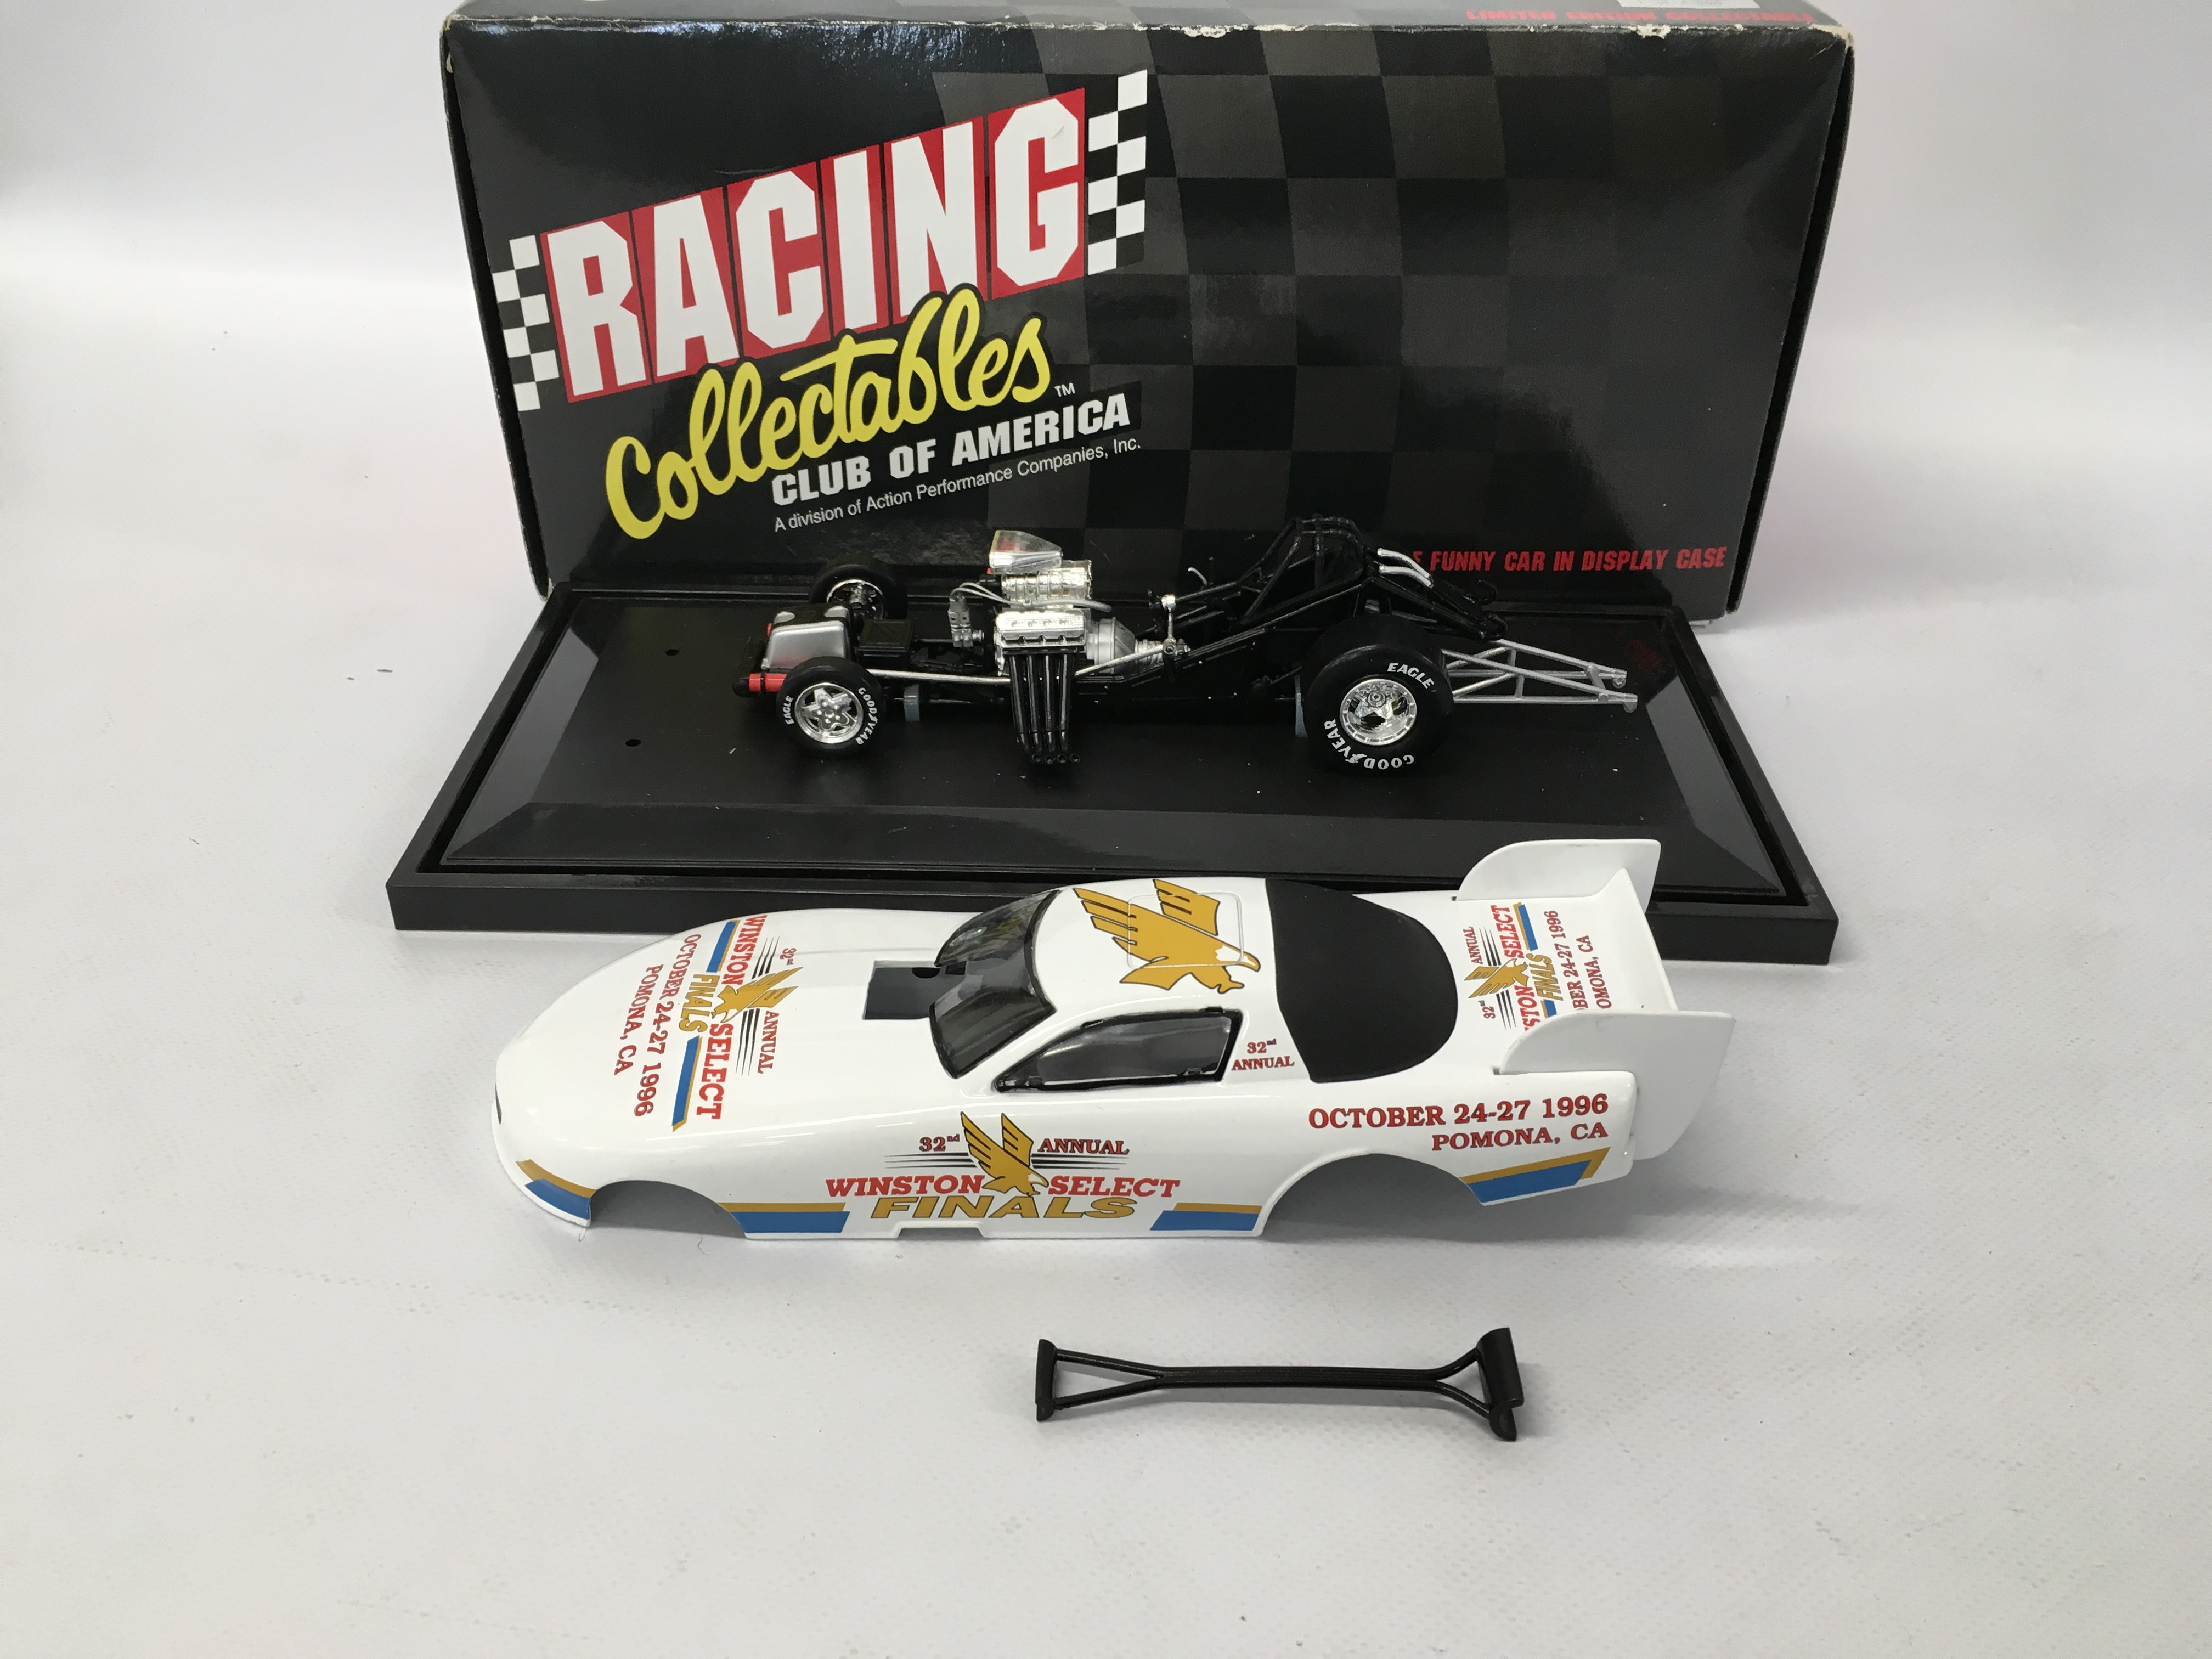 DIE-CAST RACING COLLECTABLE "WINSTON DRAG RACING" BOXED ALONG WITH AN ONYX FORMULA 1 MODELS RENAULT - Image 2 of 5